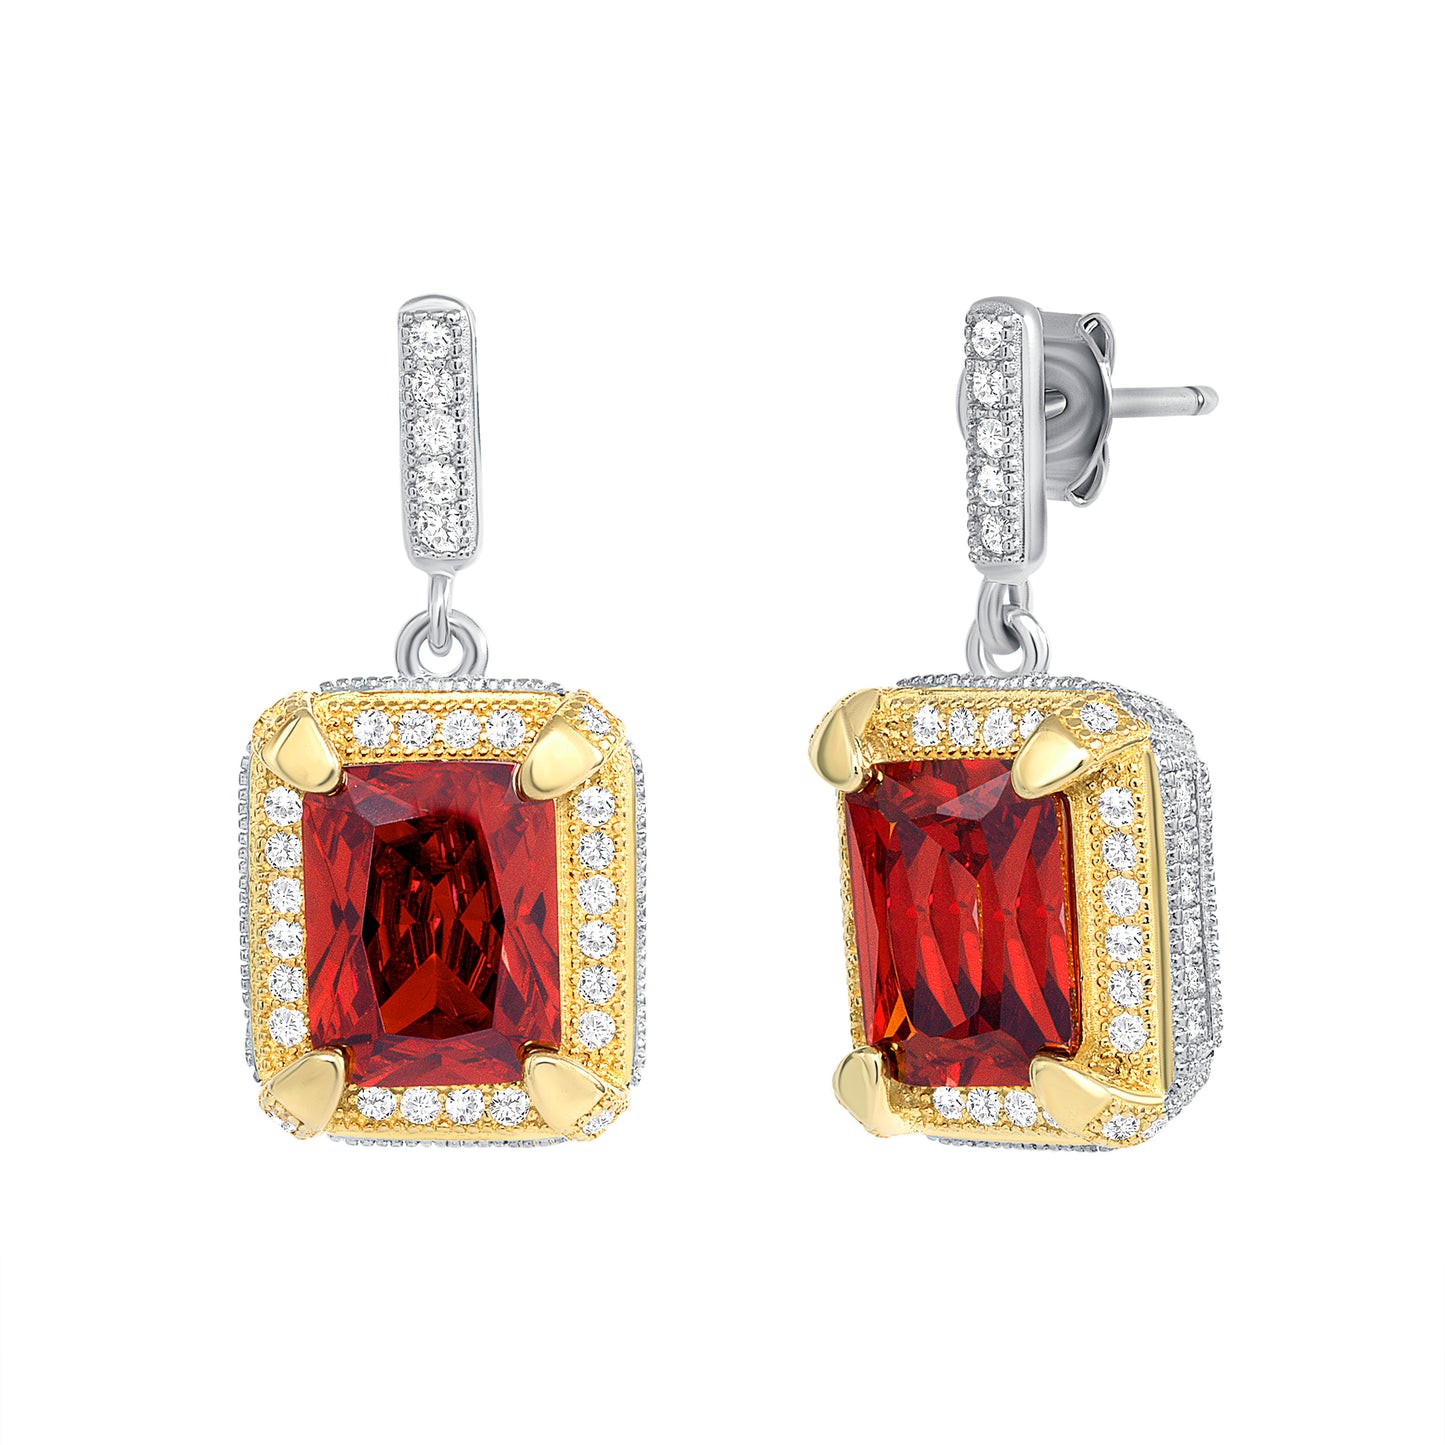 Silver 925 2 Tone Rhodium & Gold Plated Red Garnet Rectangle Cubic Zirconia Set. SETDGP1089RED